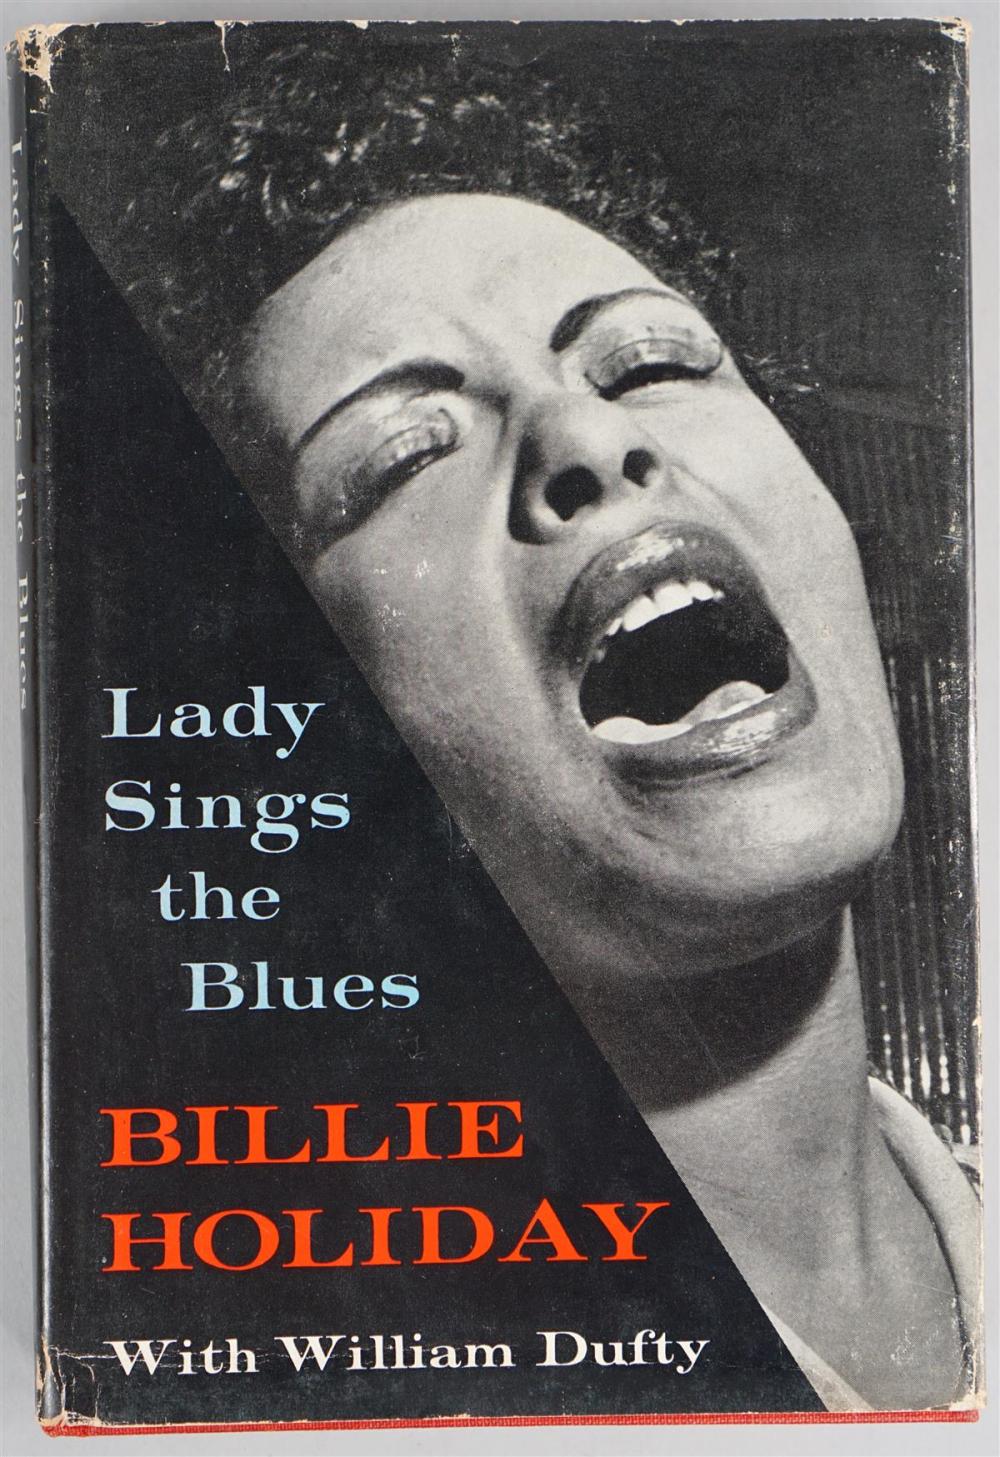 BILLIE HOLLIDAY LADY SINGS THE 33a48c